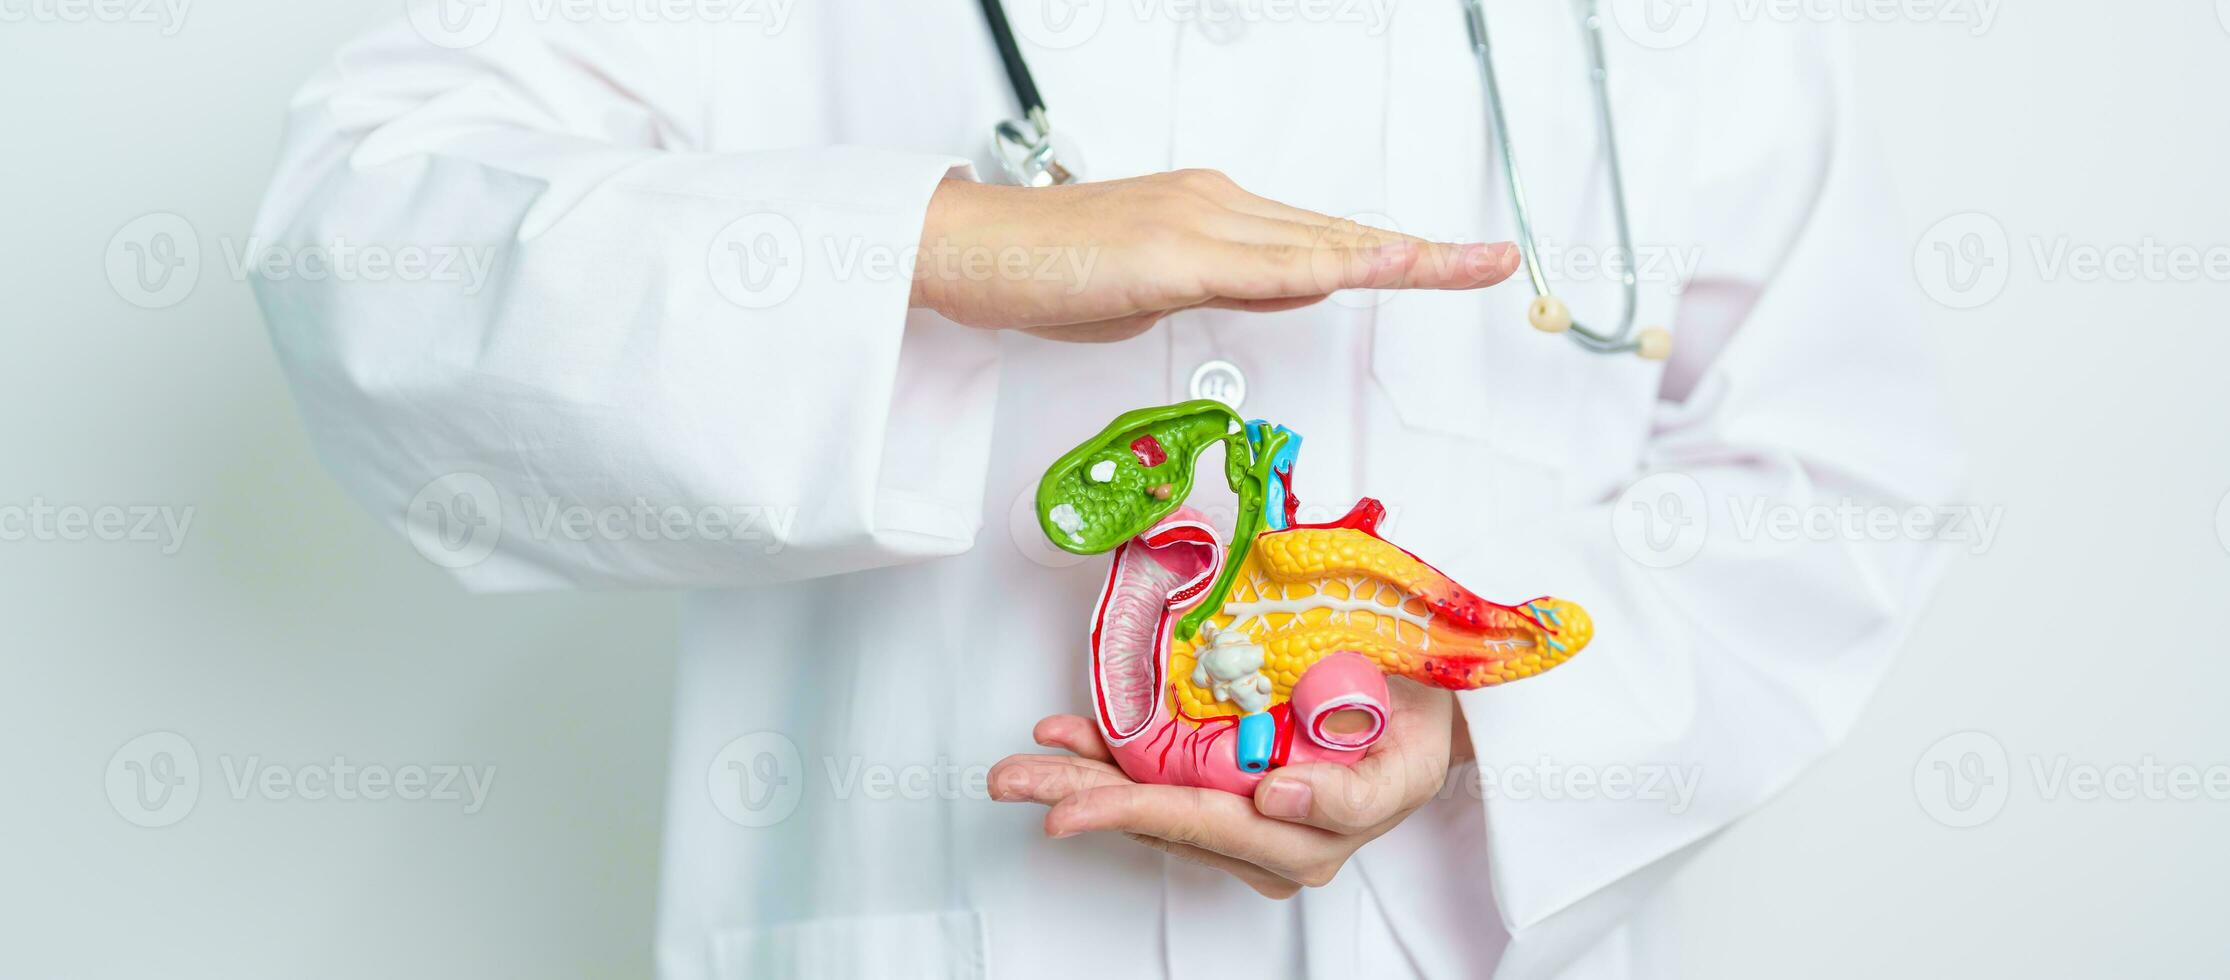 Doctor with human Pancreatitis anatomy model with Pancreas, Gallbladder, Bile Duct, Duodenum, Small intestine. Pancreatic cancer, Acute and Chronic pancreatitis,  Digestive system and Health concept photo